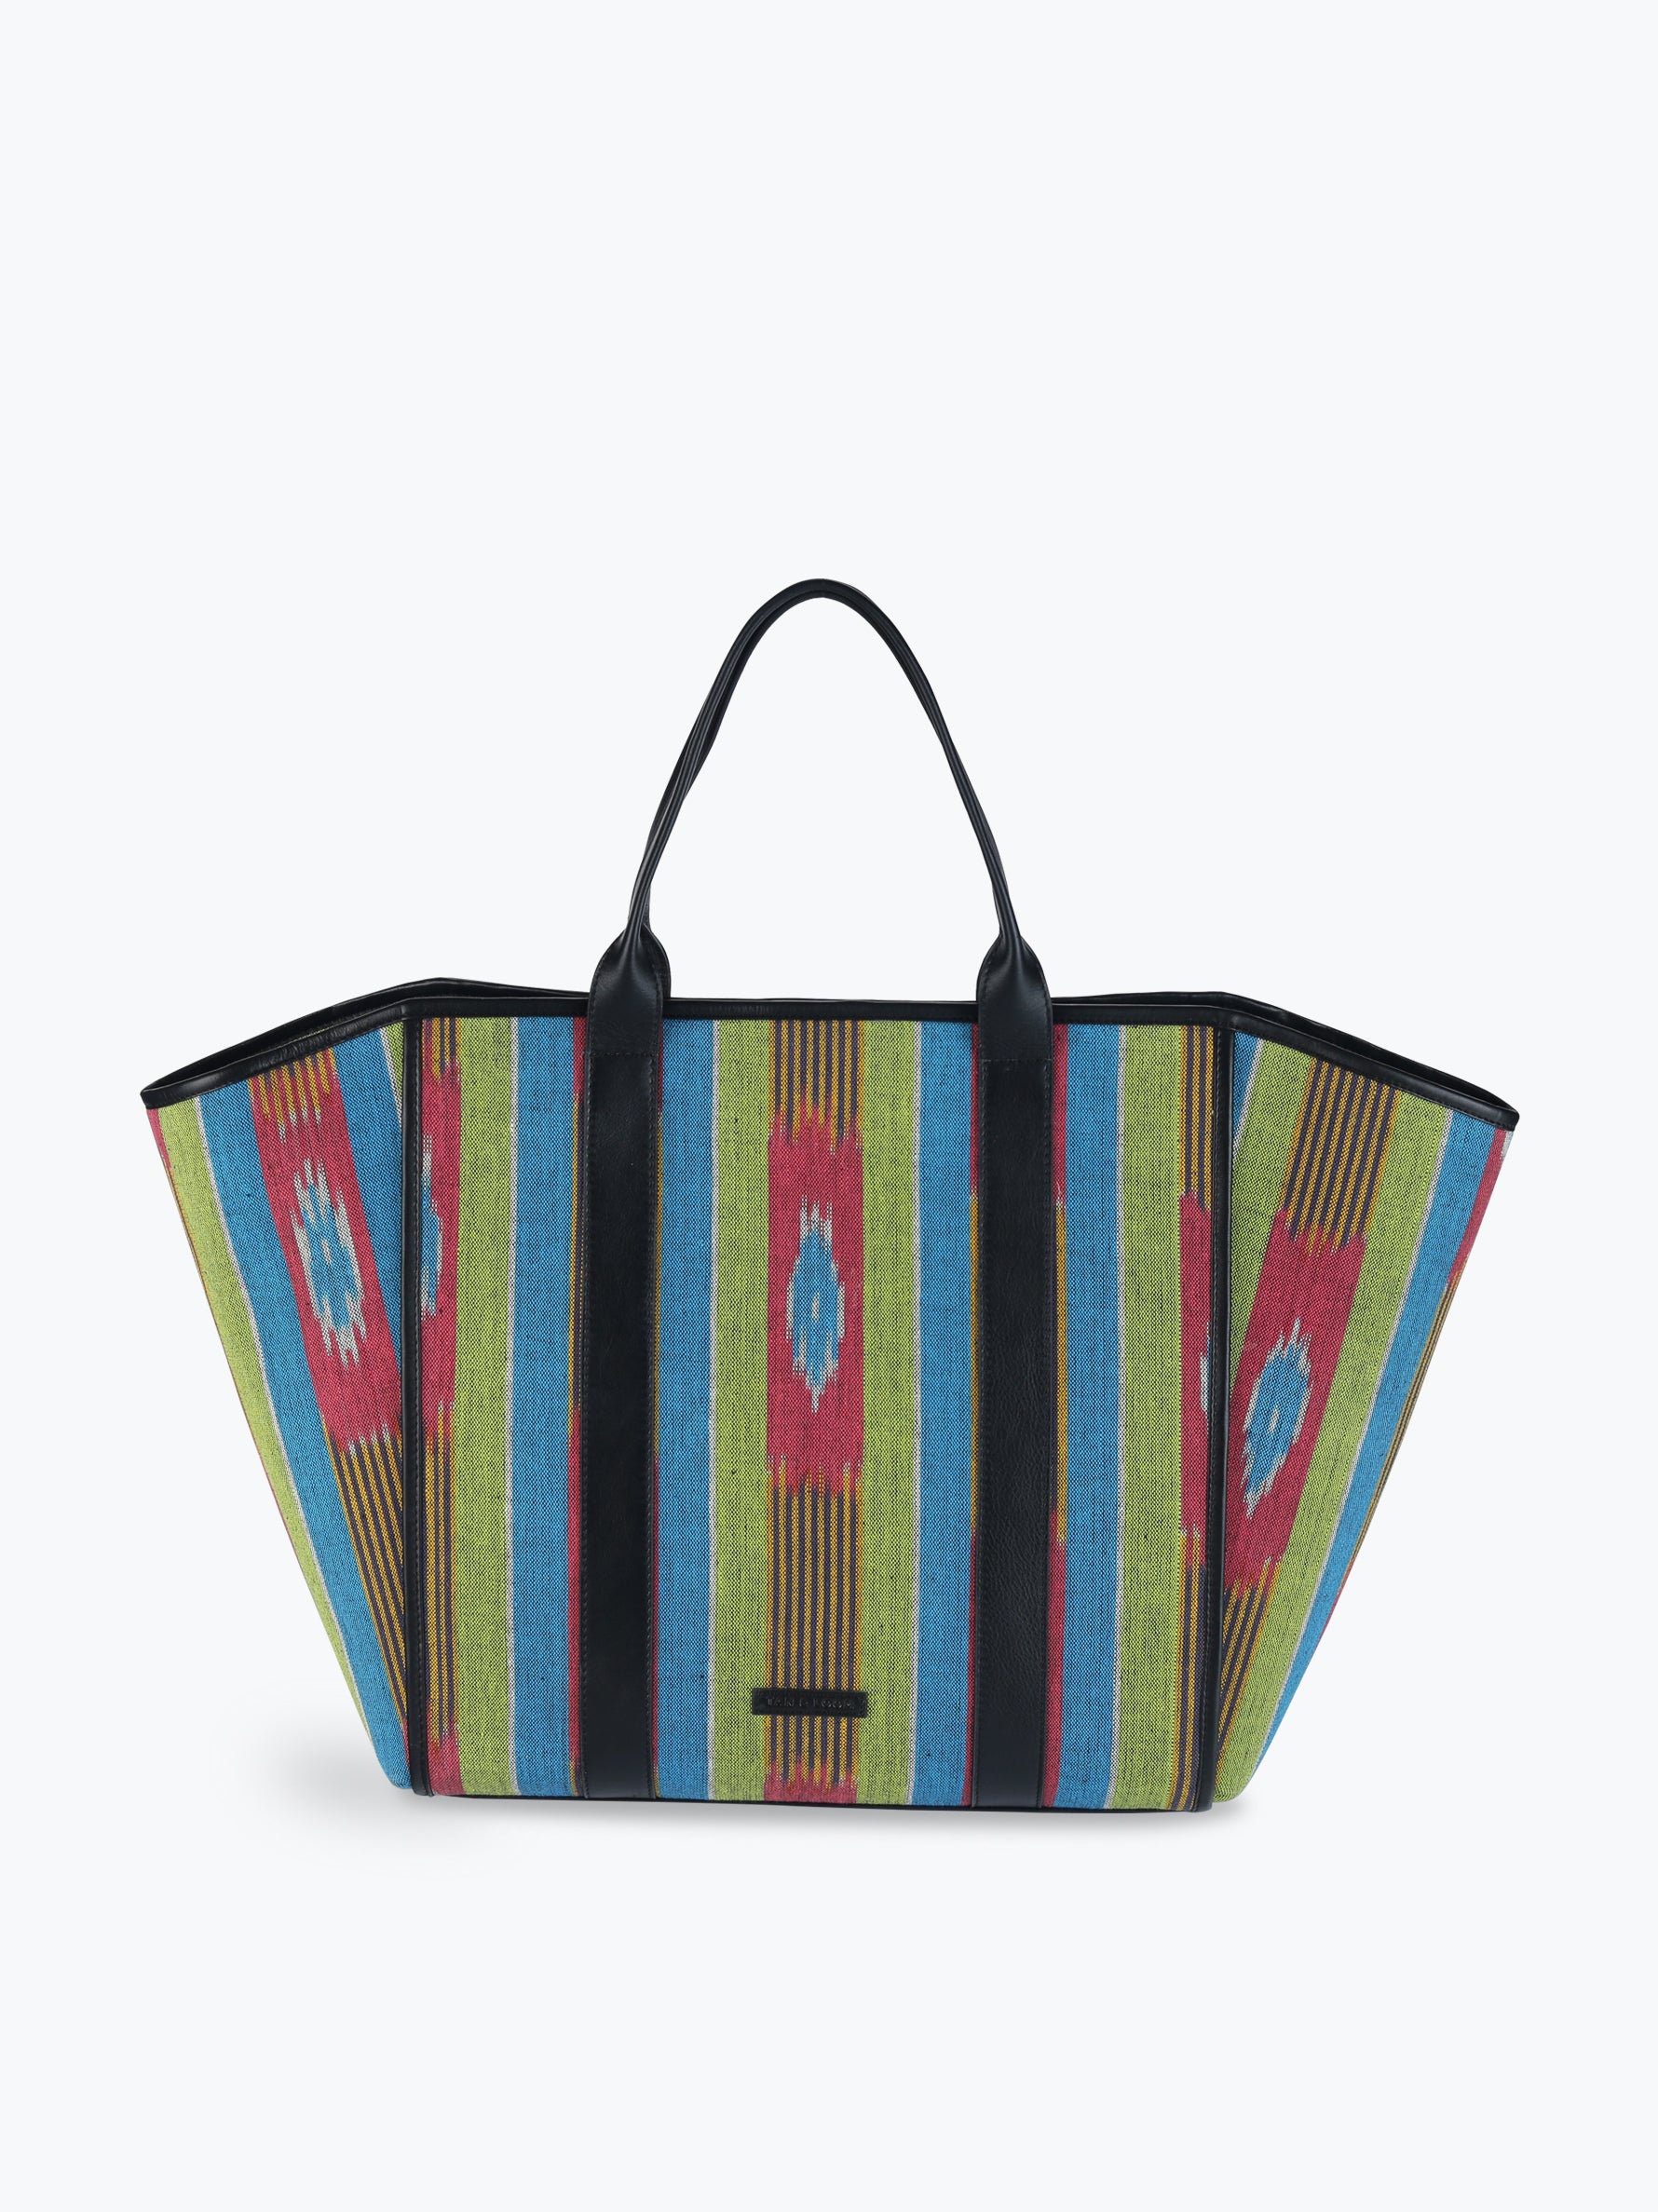 Excess Baggage Tote (Multi)